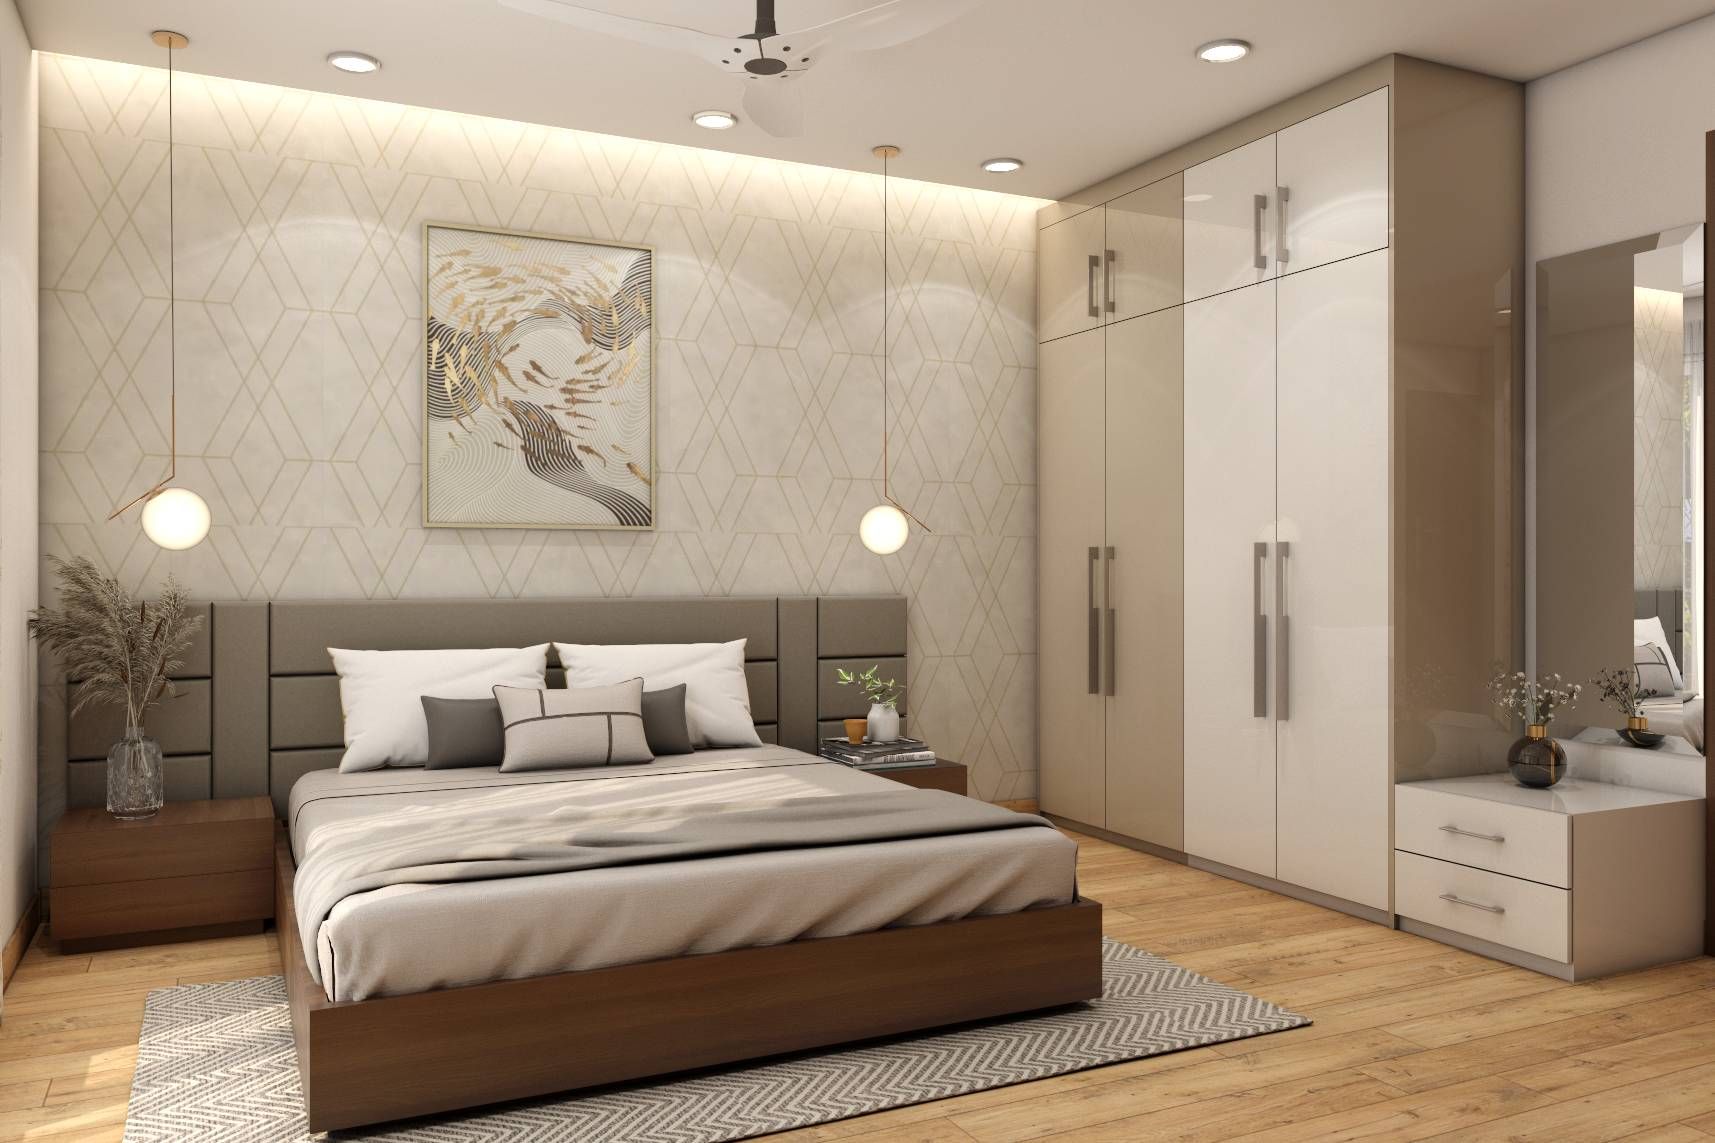 Contemporary Master Bedroom Design With Beige And Grey Palette